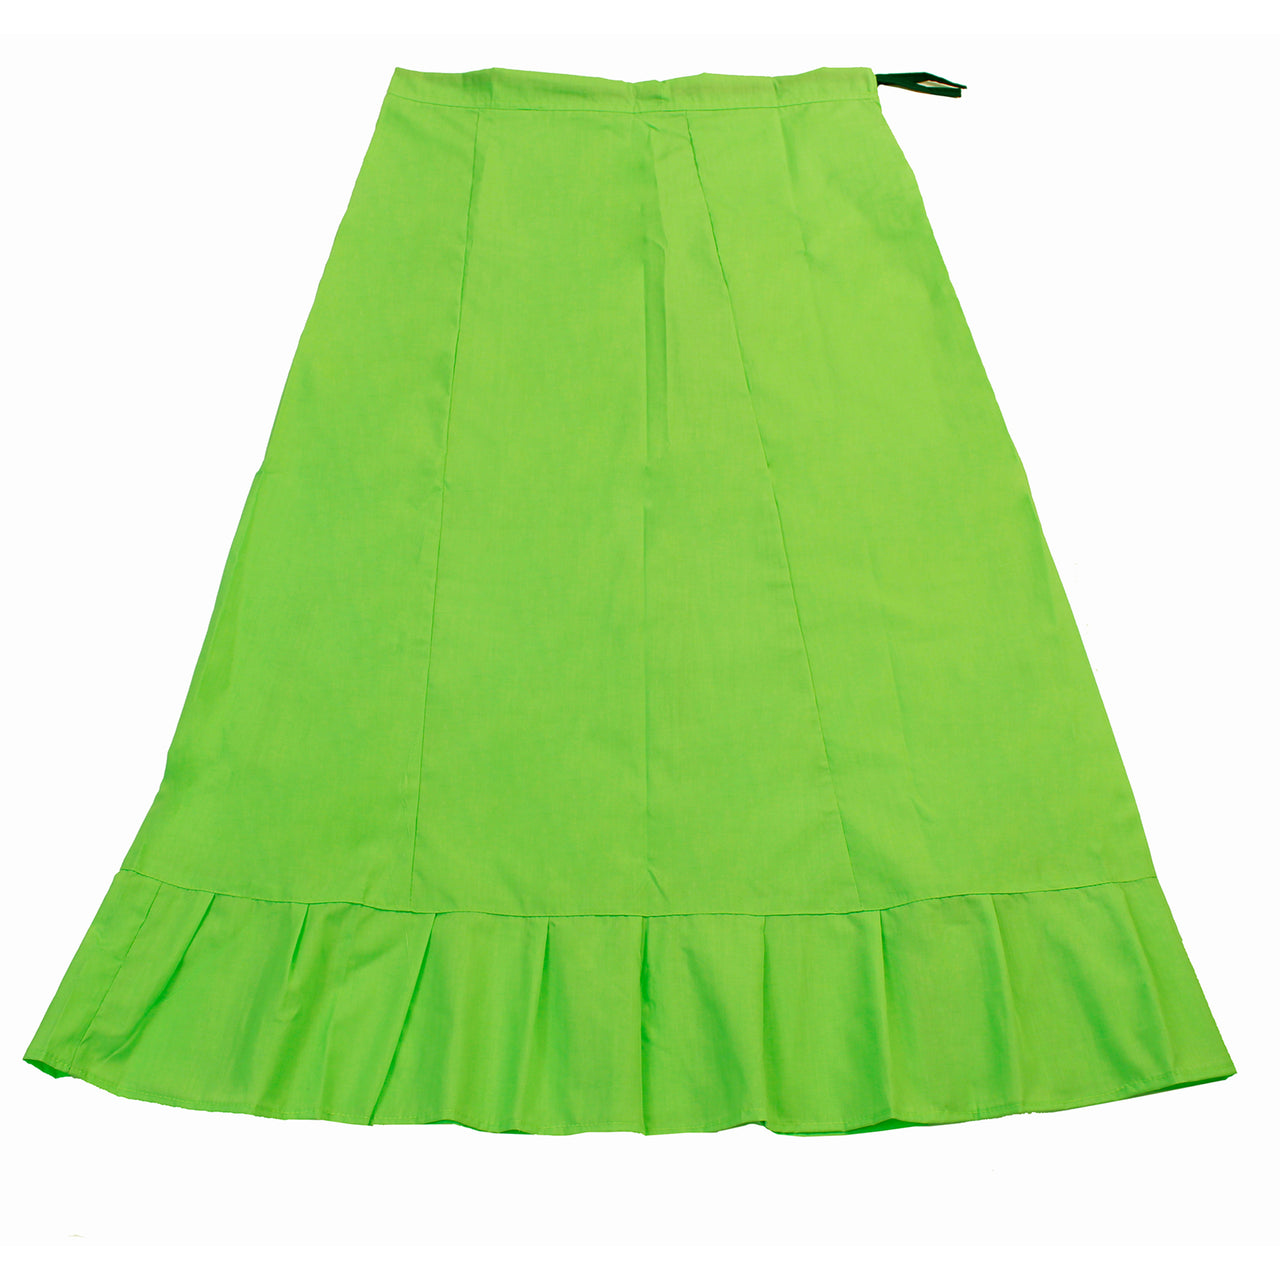 Lime Green - Sari (Saree) Petticoat - Available in S, M, L & XL - Underskirts For Sari's